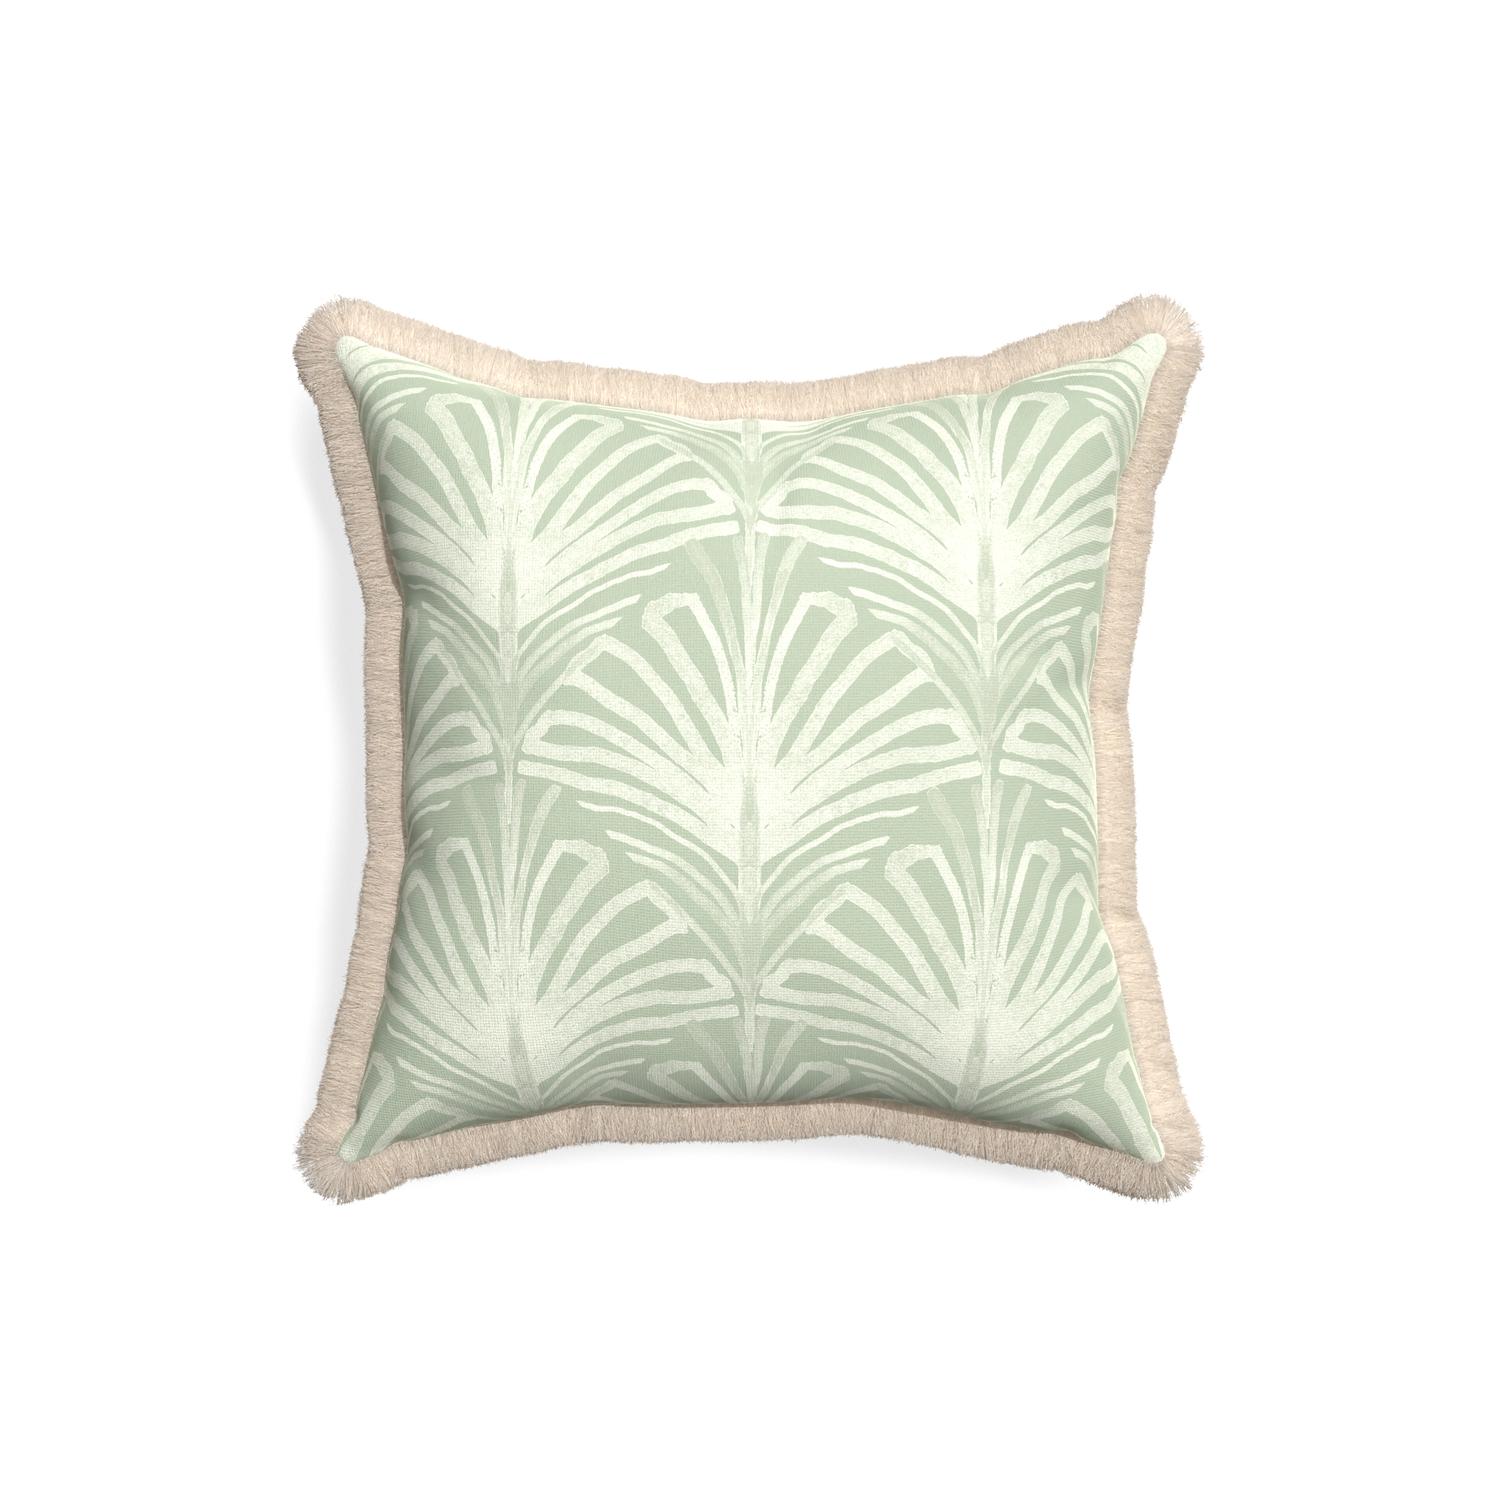 18-square suzy sage custom sage green palmpillow with cream fringe on white background